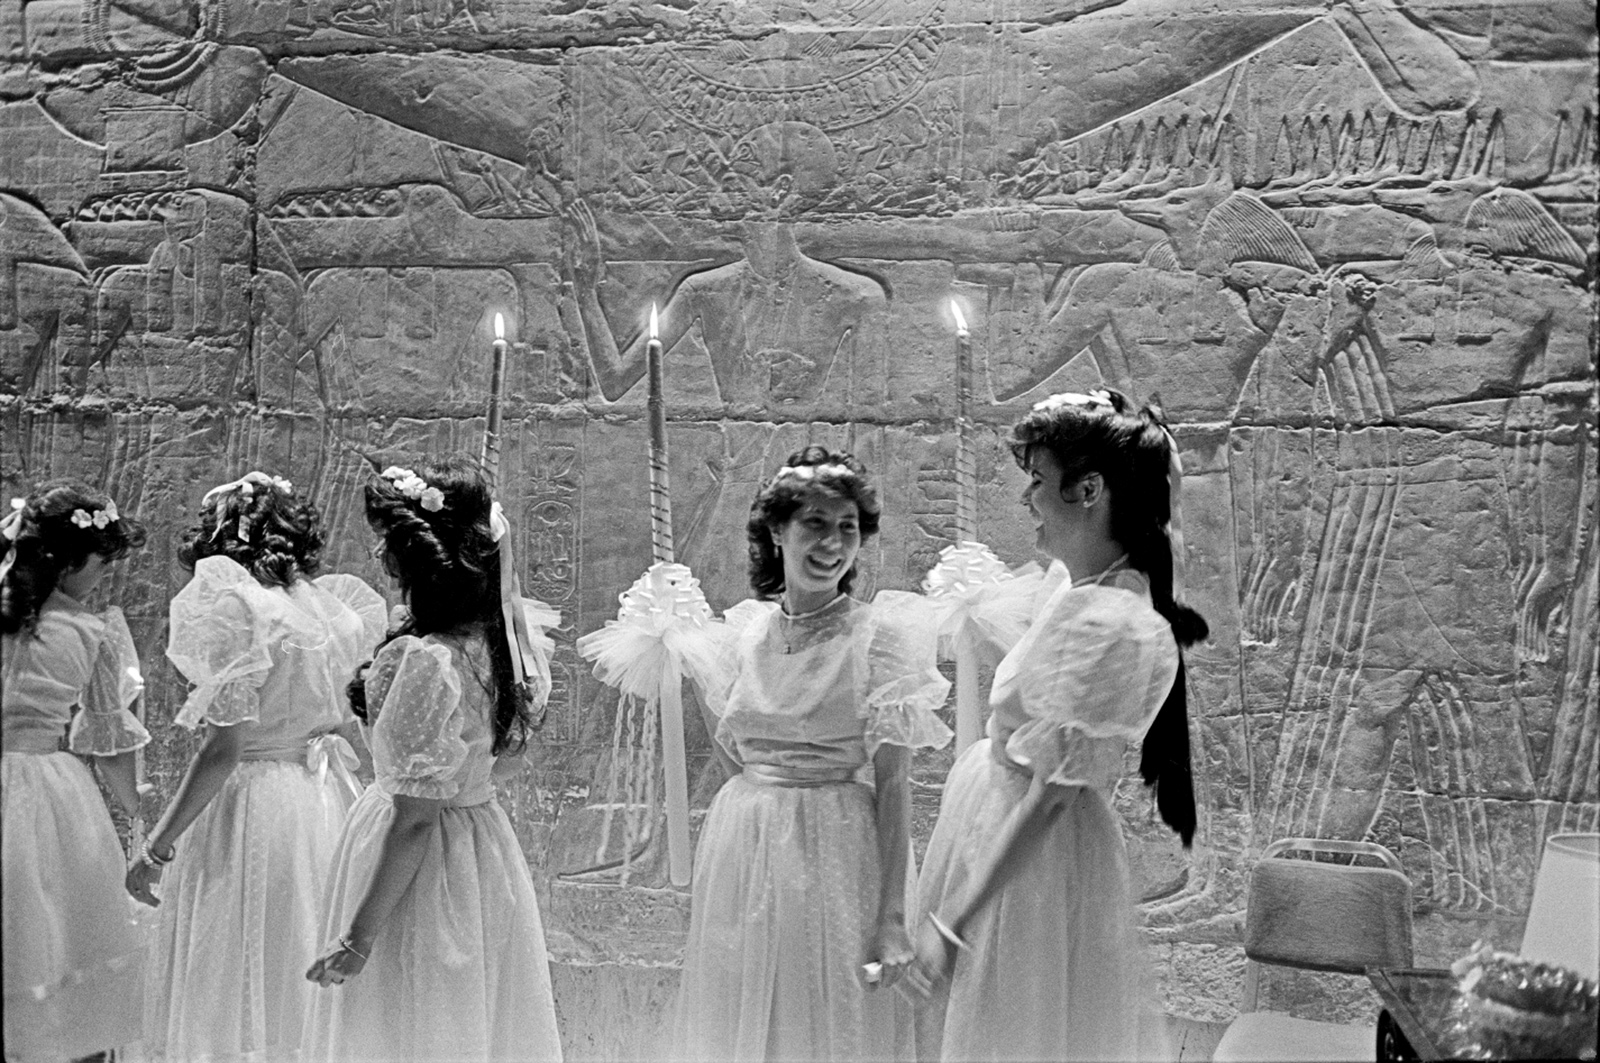 Maids of honor at an upper-class wedding in Cairo, 1987